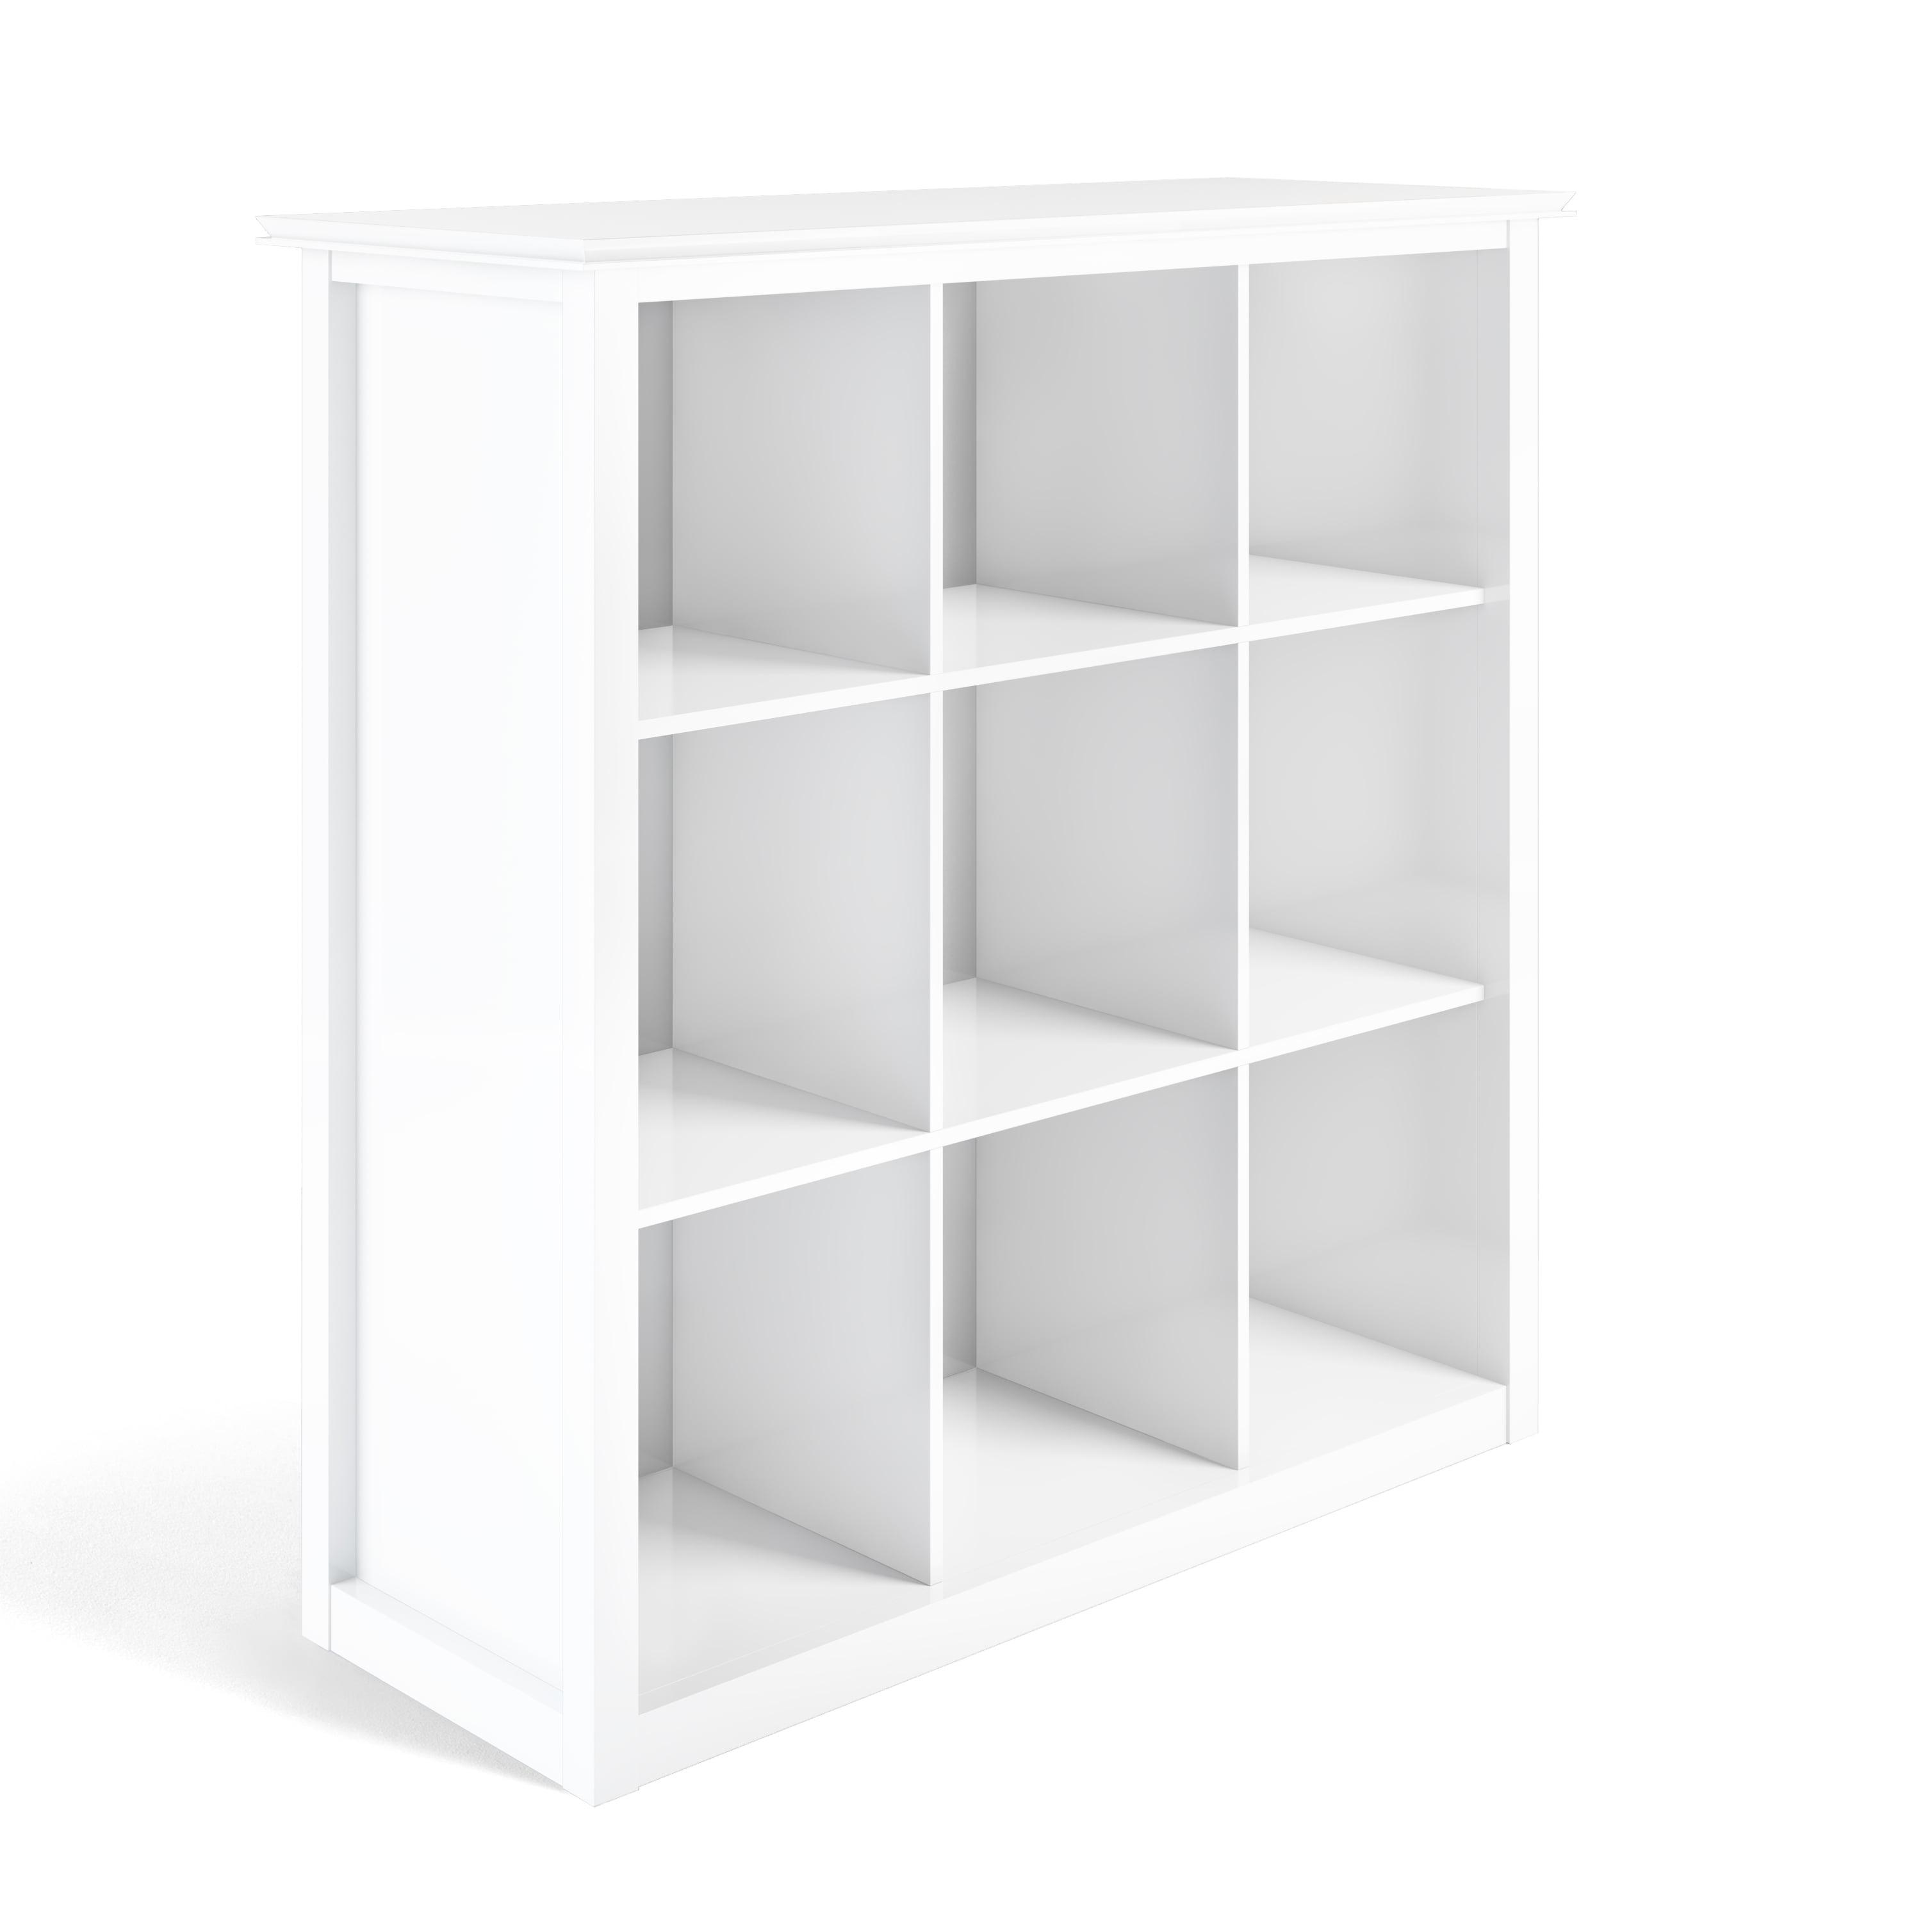 Artisan Handcrafted Solid Wood 9-Cube Storage Bookcase in White